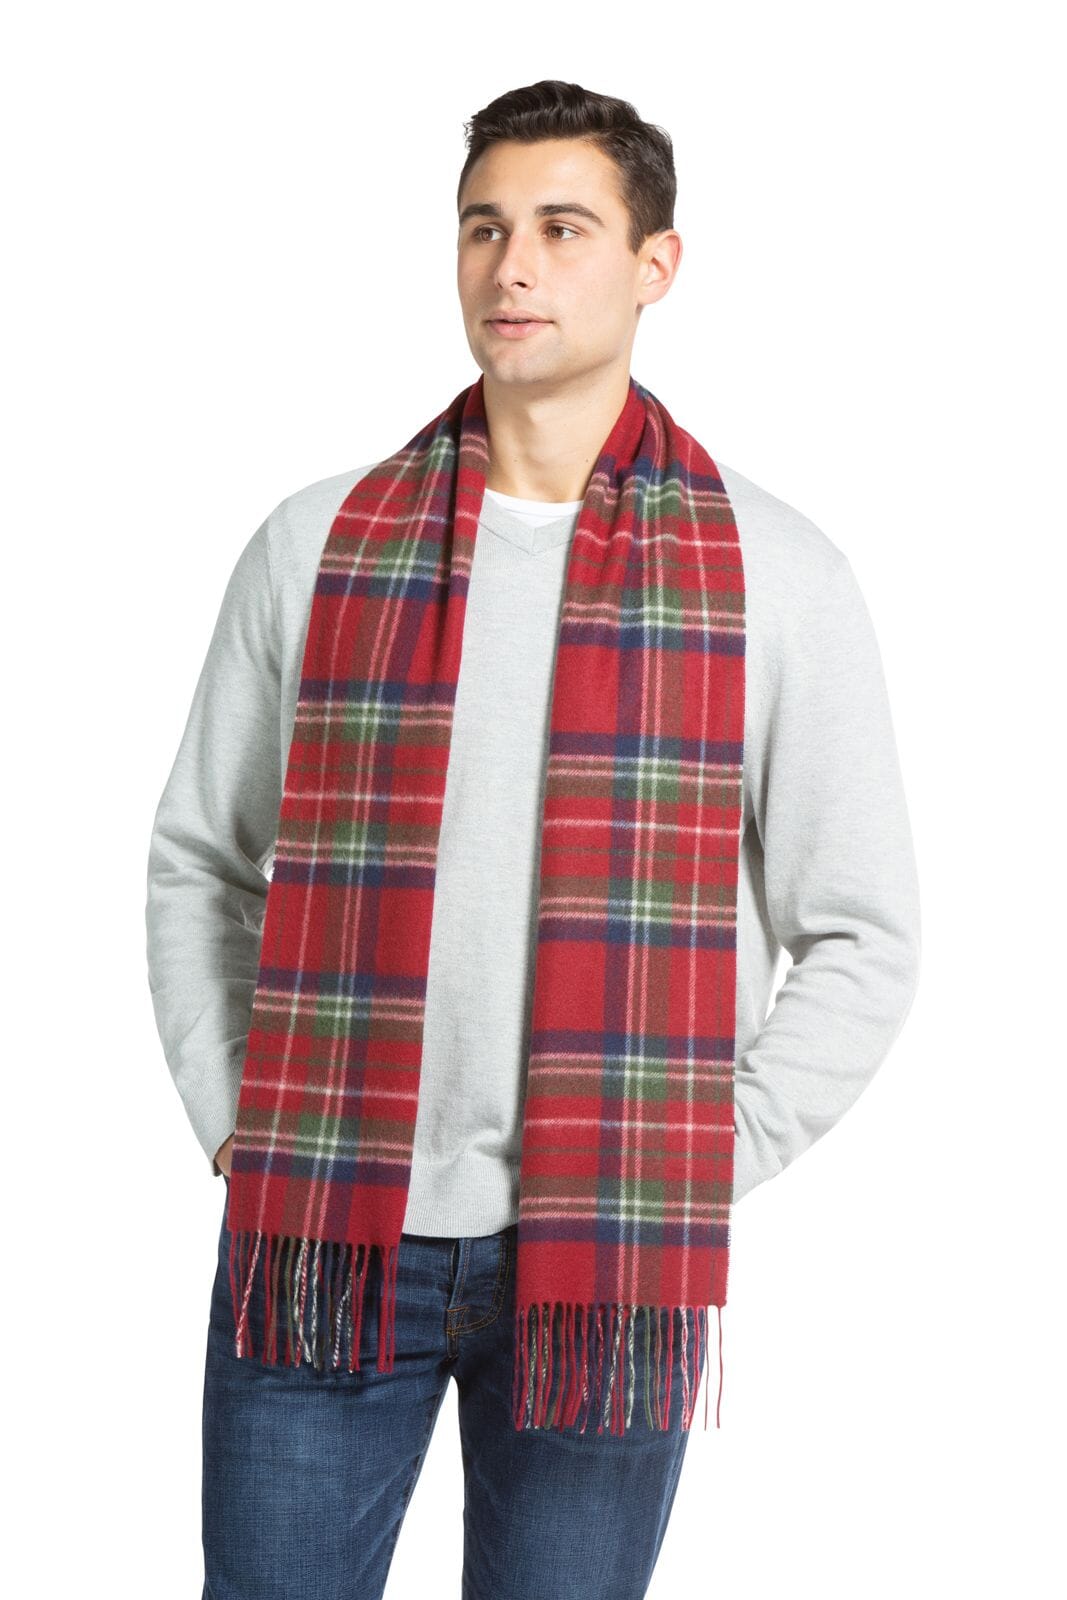  Fishers Finery Mens 100% Pure Cashmere Scarf, Warm